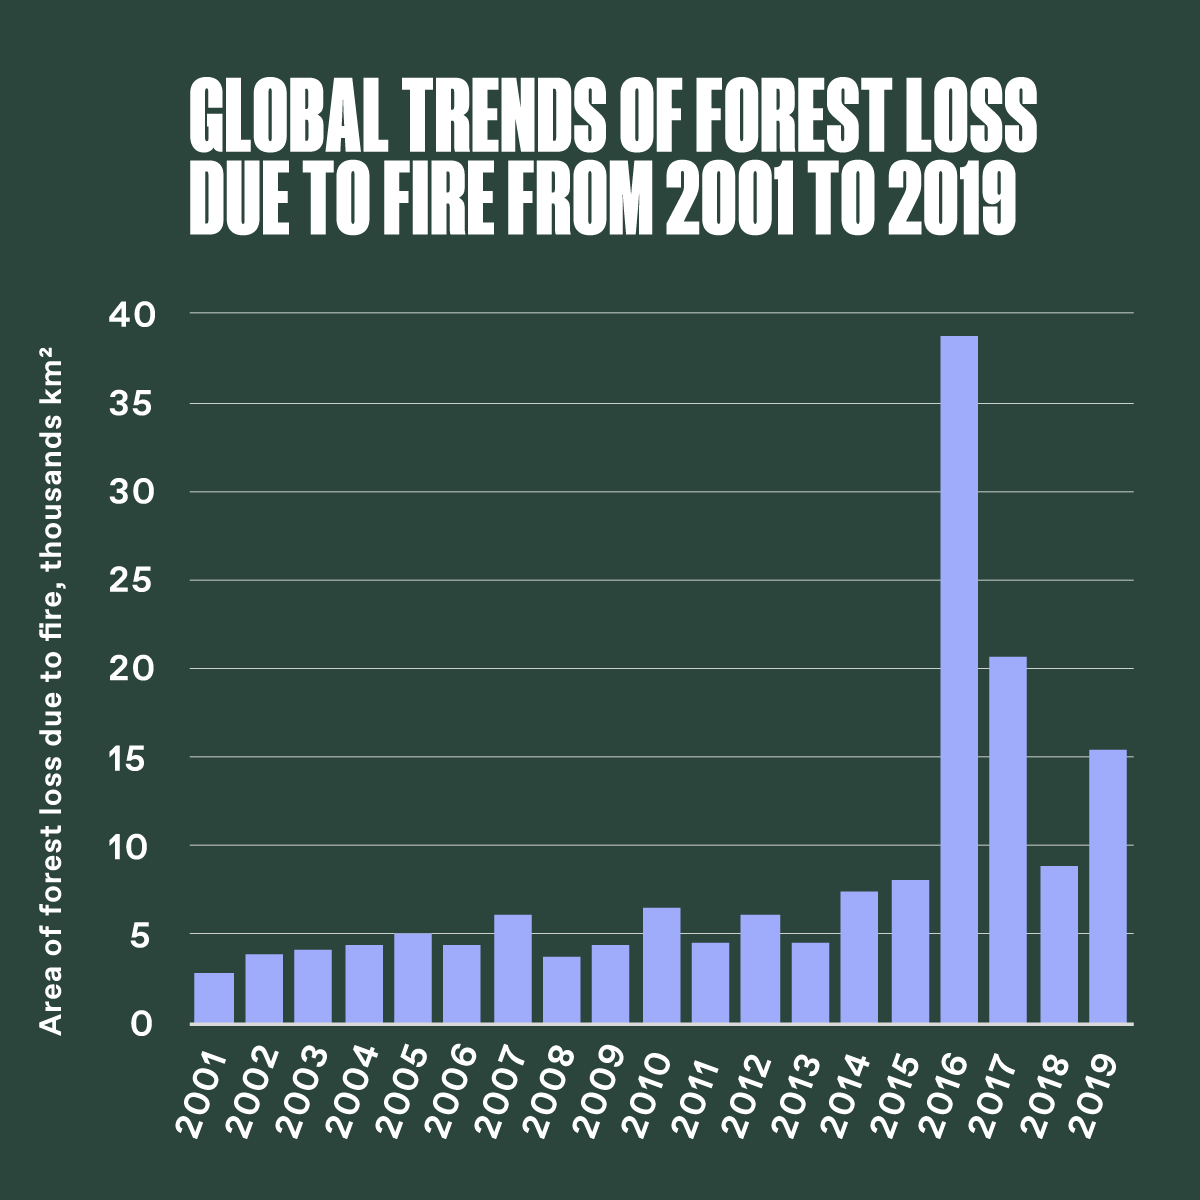 Bar graph depicting "Global trends of forest loss due to fire from 2001-2019". Data bars are water blue in colour on a forest green background. The X axis shows the years from 2001-2019, the Y axis is Areas of forest loss due to fires, thousands km squared, running from 0-40. The graph shows a gradual increase before a sharp peak in 2016.